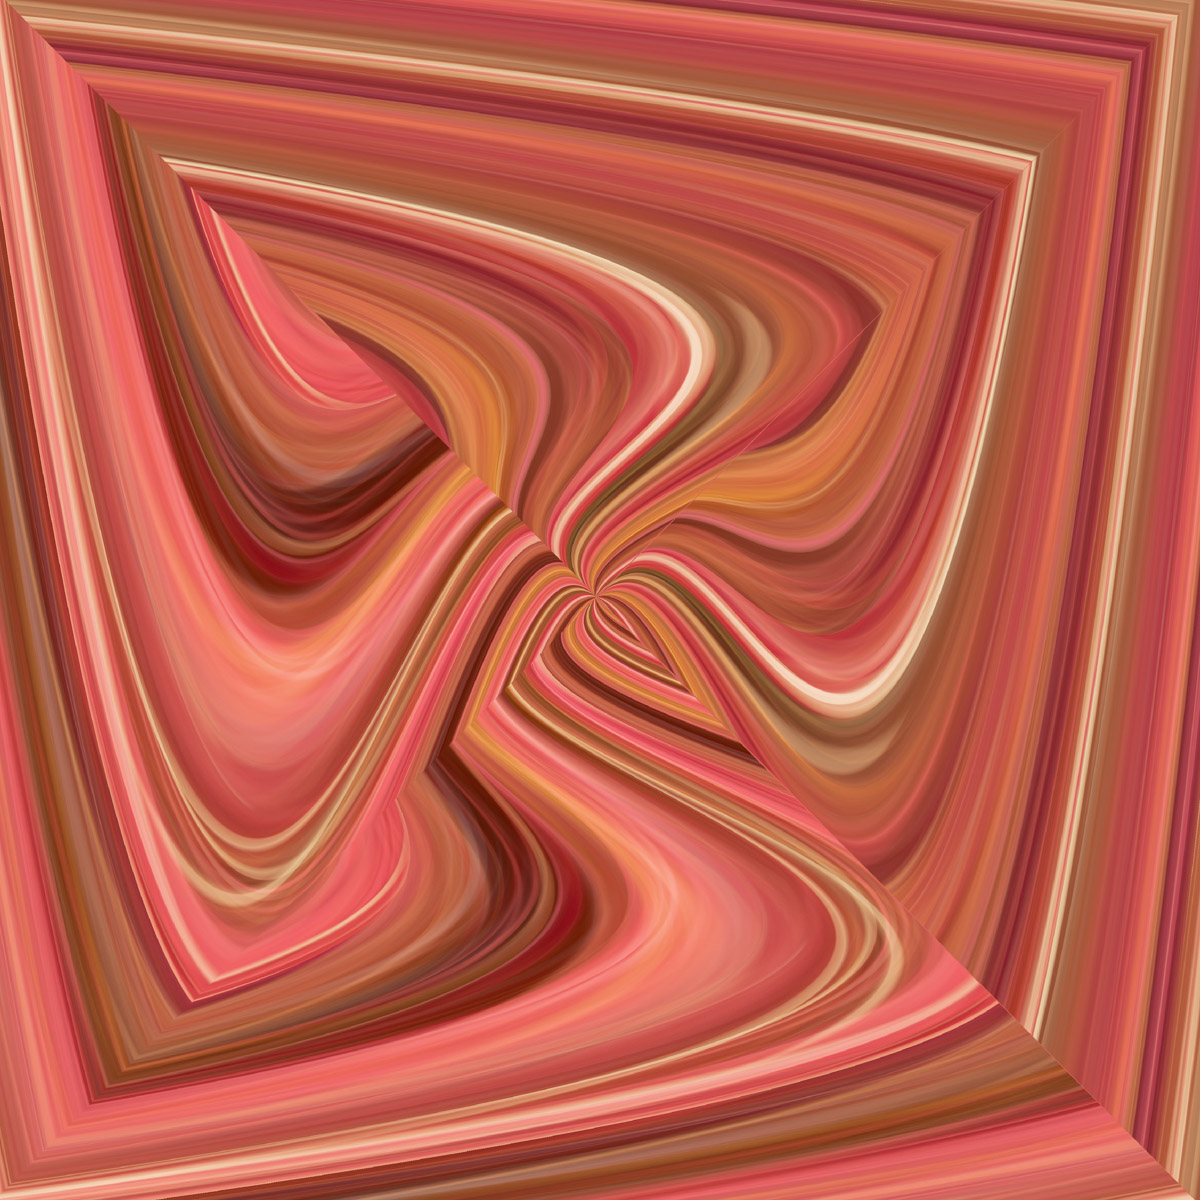 A square shaped abstract image in shades of pink.